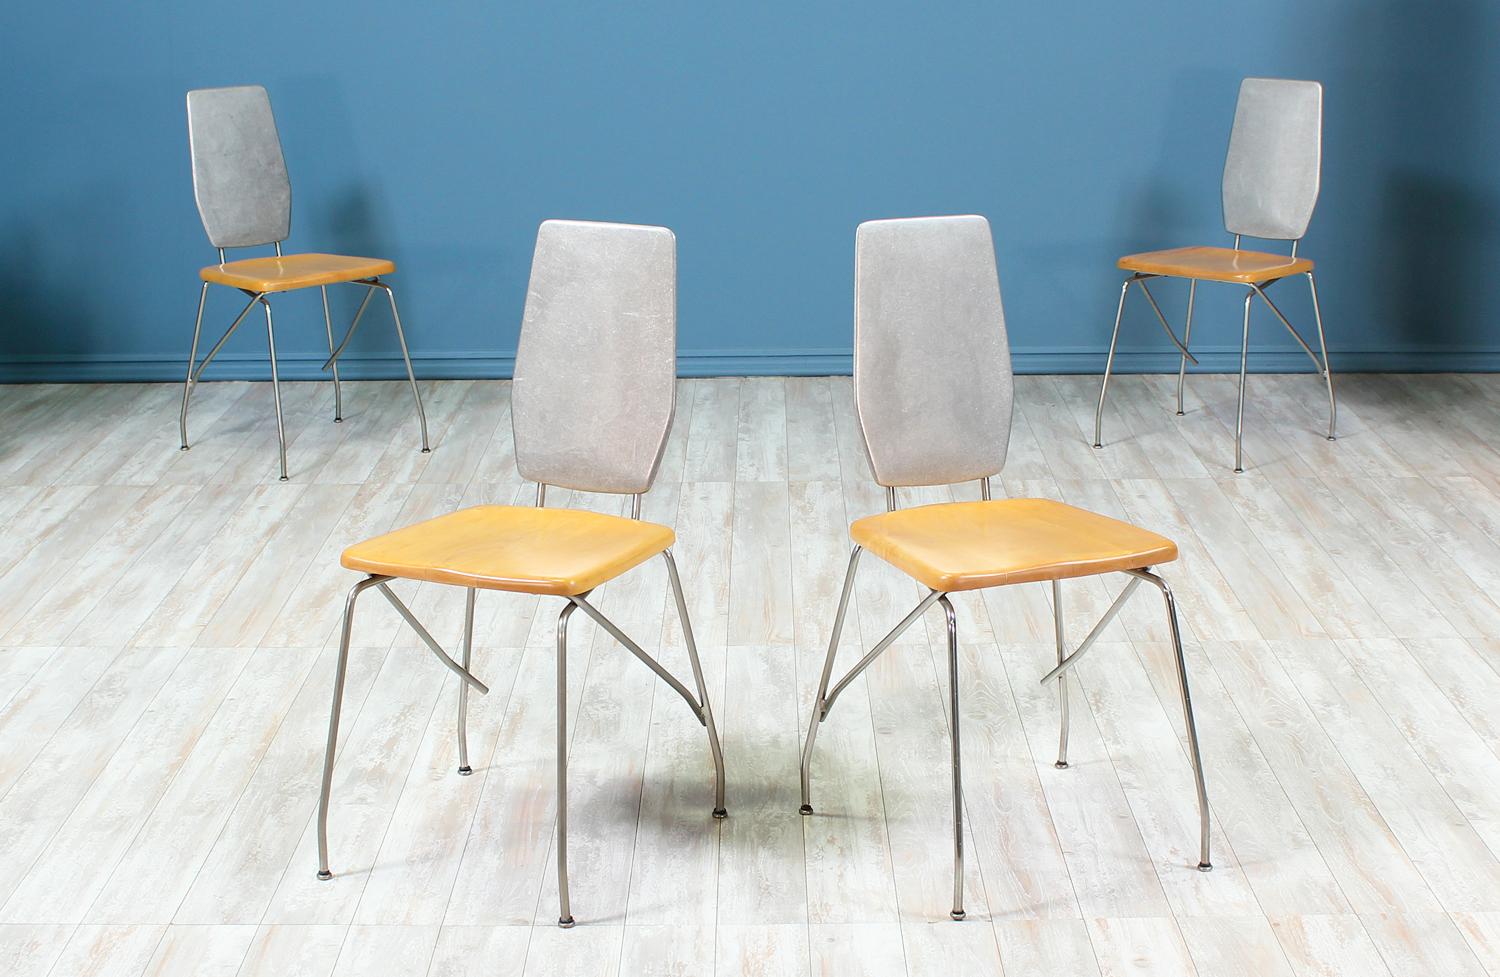 Splendid set of four dining chairs designed by Robert Josten and manufactured by Robert Josten and Associates in the United States circa 1970’s. Each of these chairs feature the original cast aluminum bases that are perfectly complimented with the